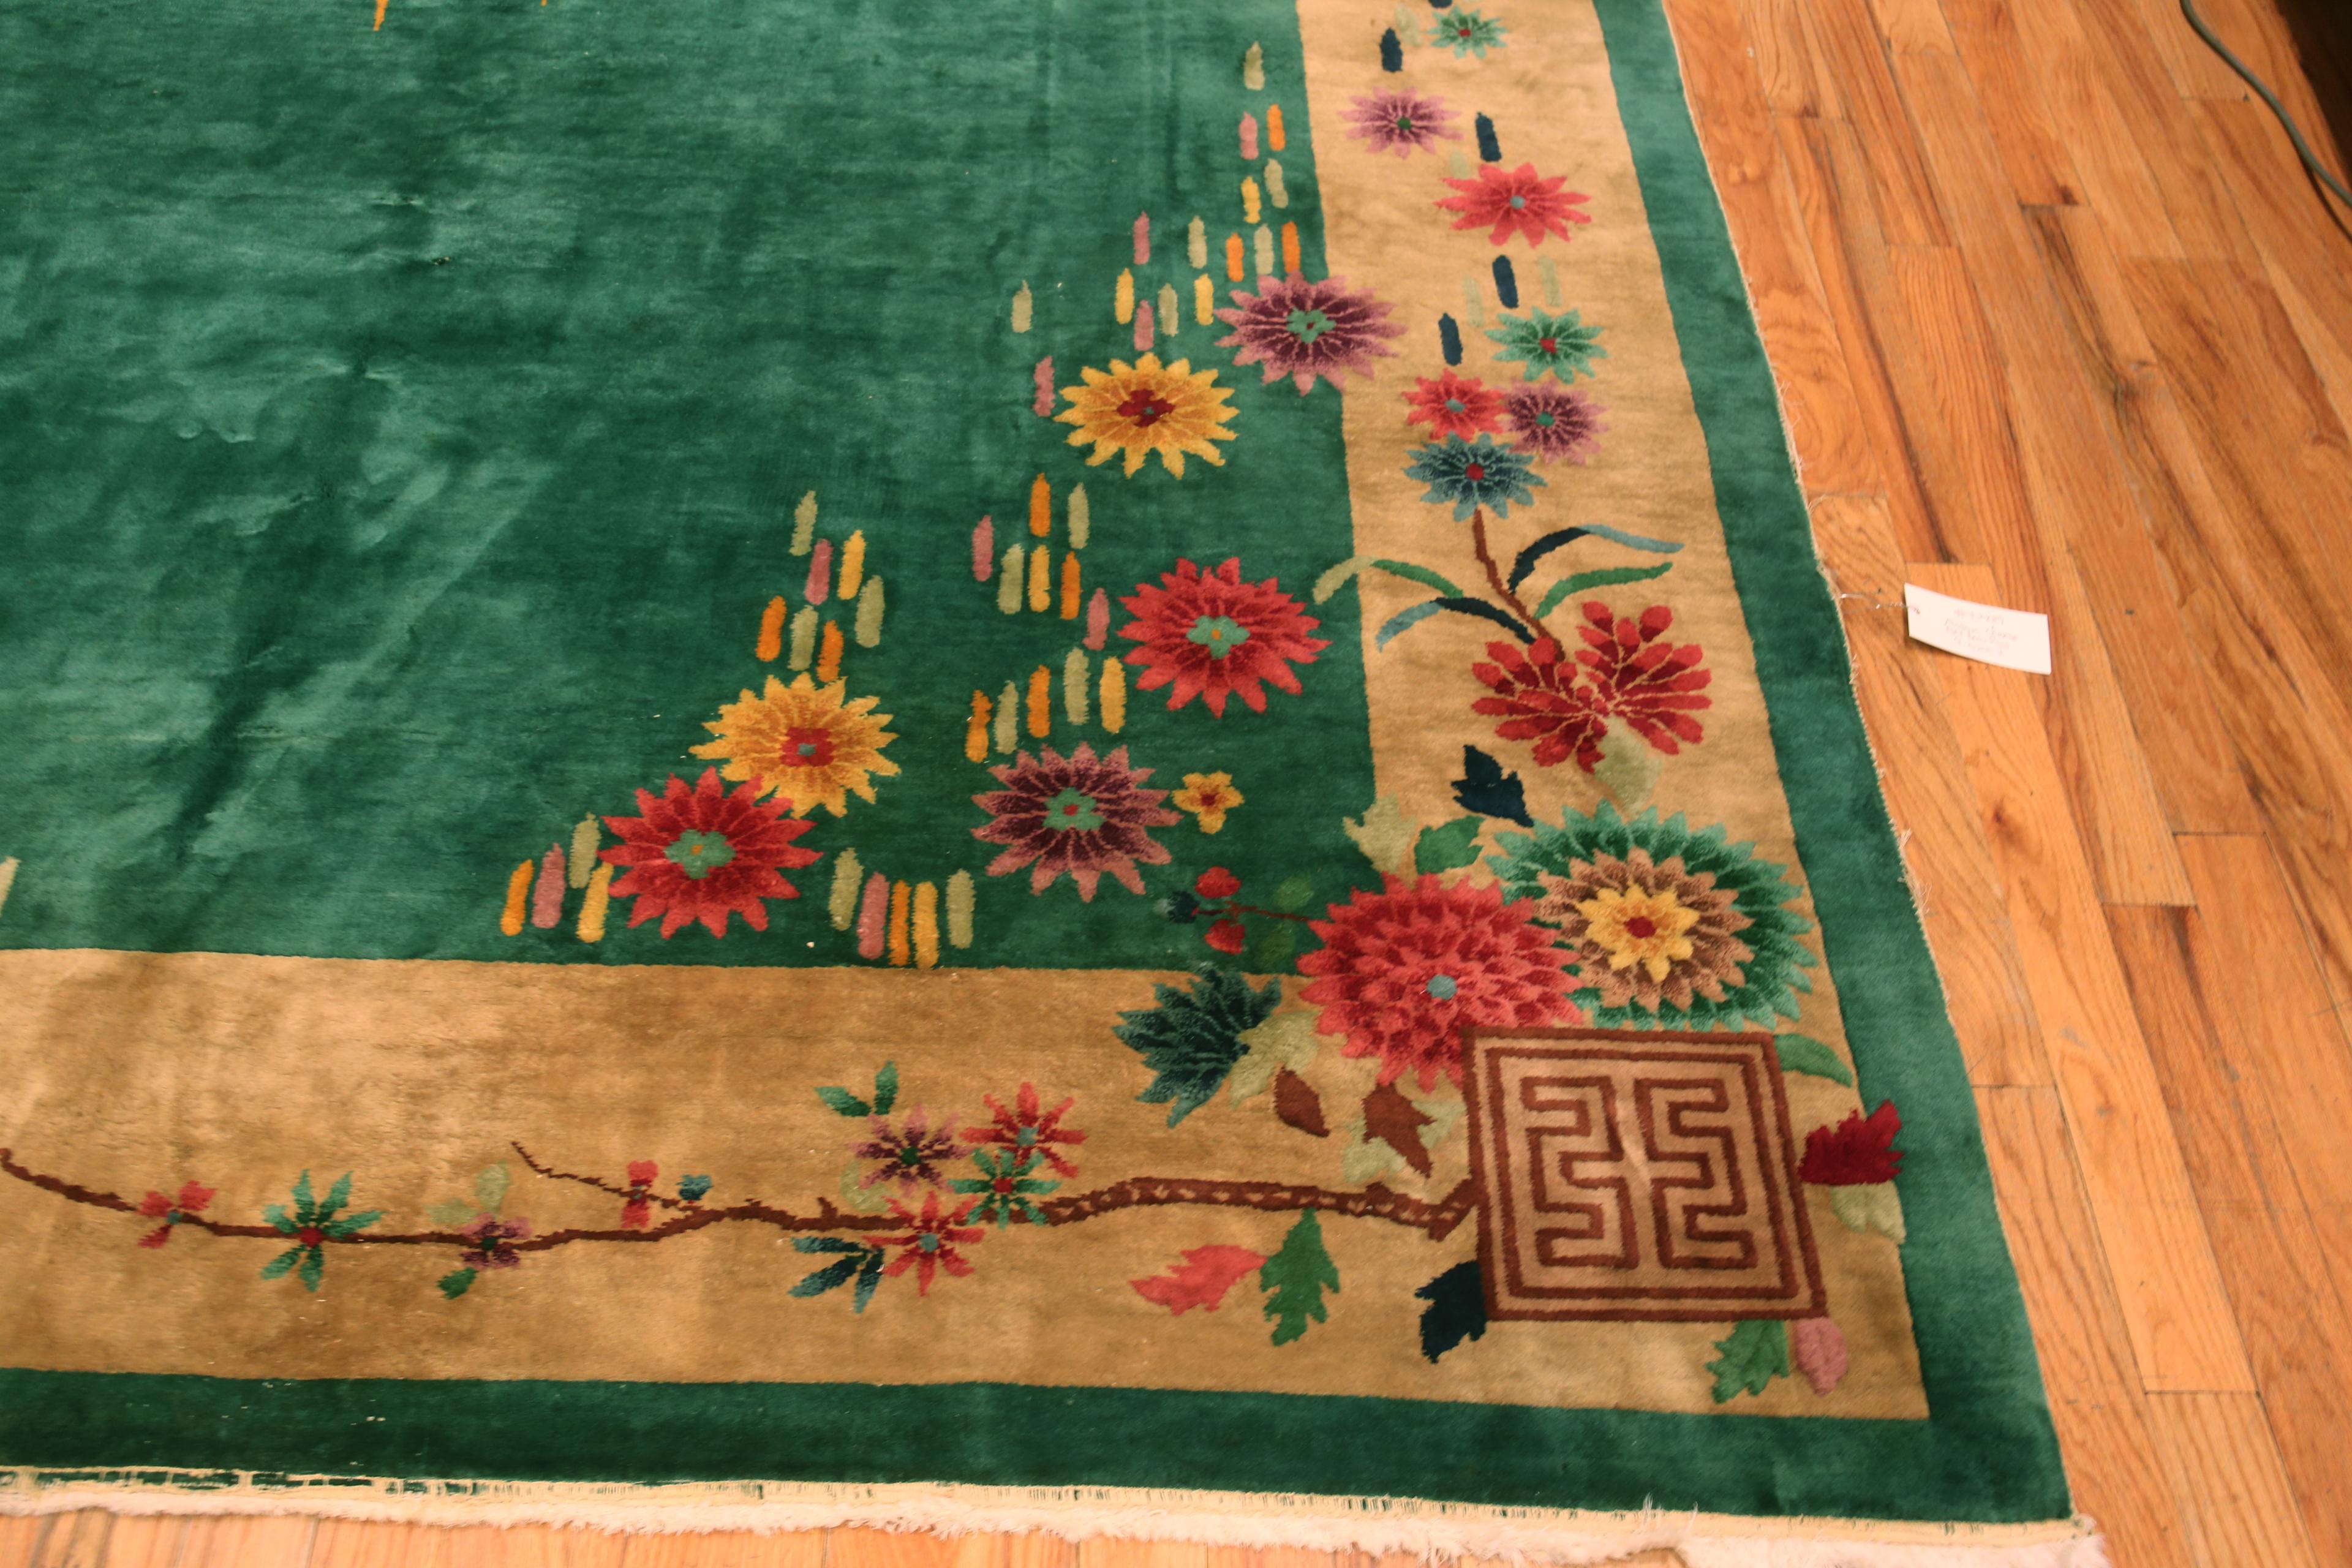 Gorgeous Antique Chinese Art Deco Rug In Green 9' x 11'7